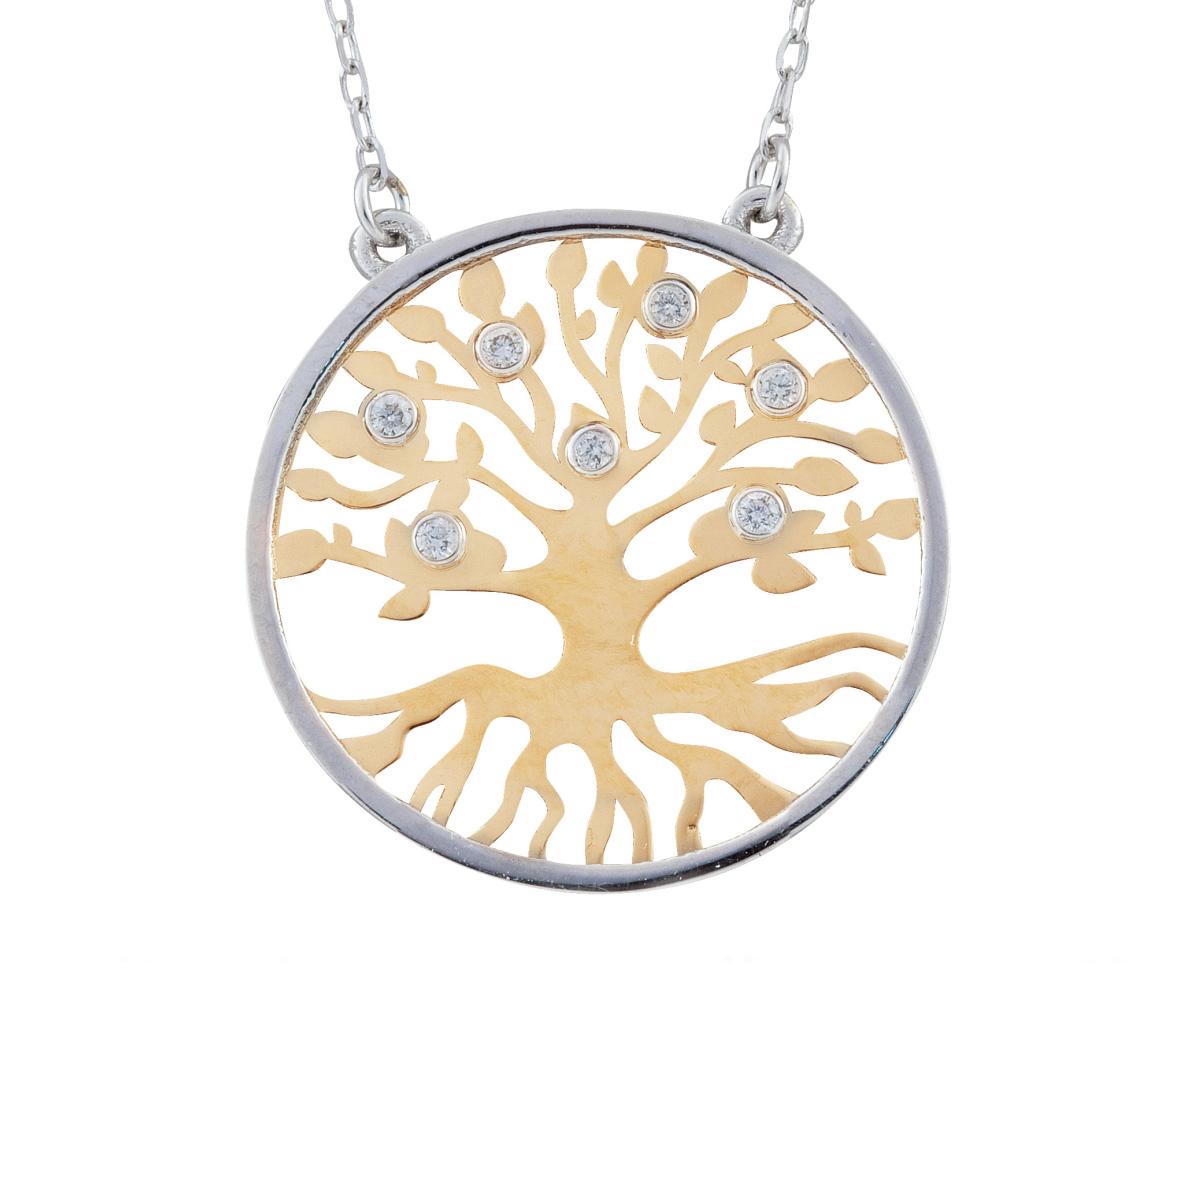 18kt gold tree of life necklace with diamonds - CD374